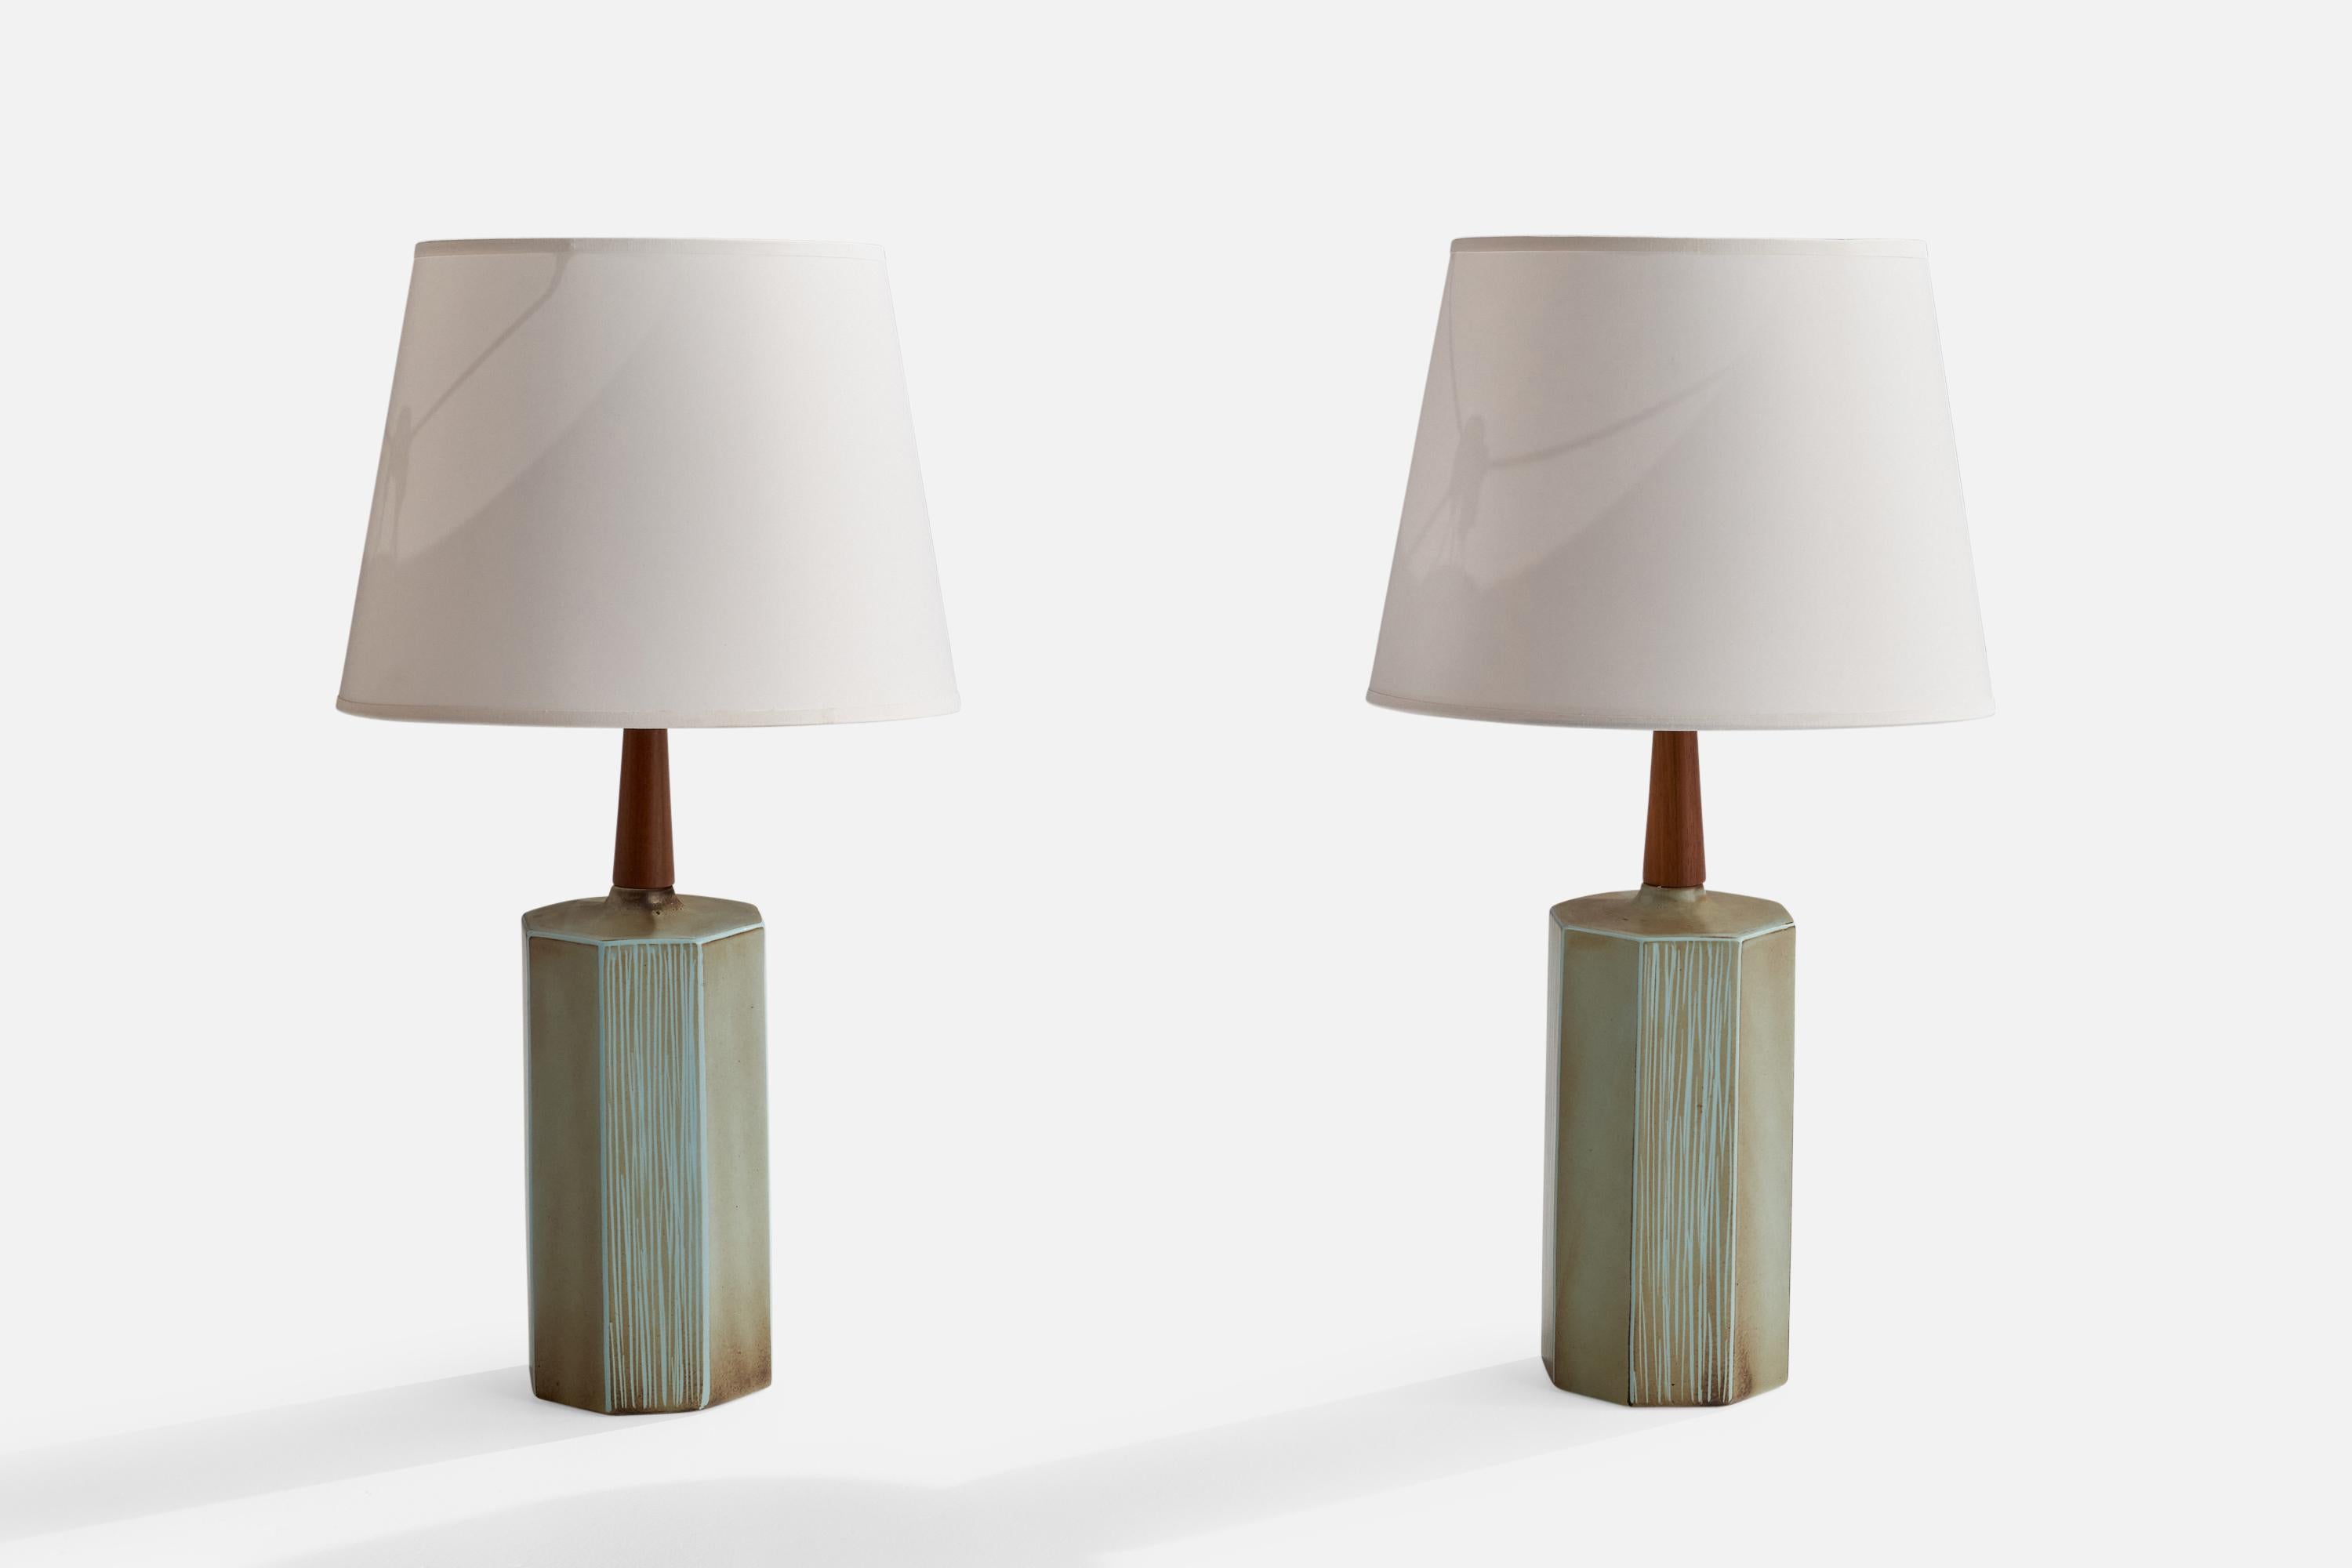 A pair of ceramic and walnut table lamp designed and produced in the US, 1950s.

Overall Dimensions (inches): 22.5”  H x 11.5” W x 4.75” D
Stated dimensions include shade.
Bulb Specifications: E-26 Bulb
Number of Sockets: 2
All lighting will be